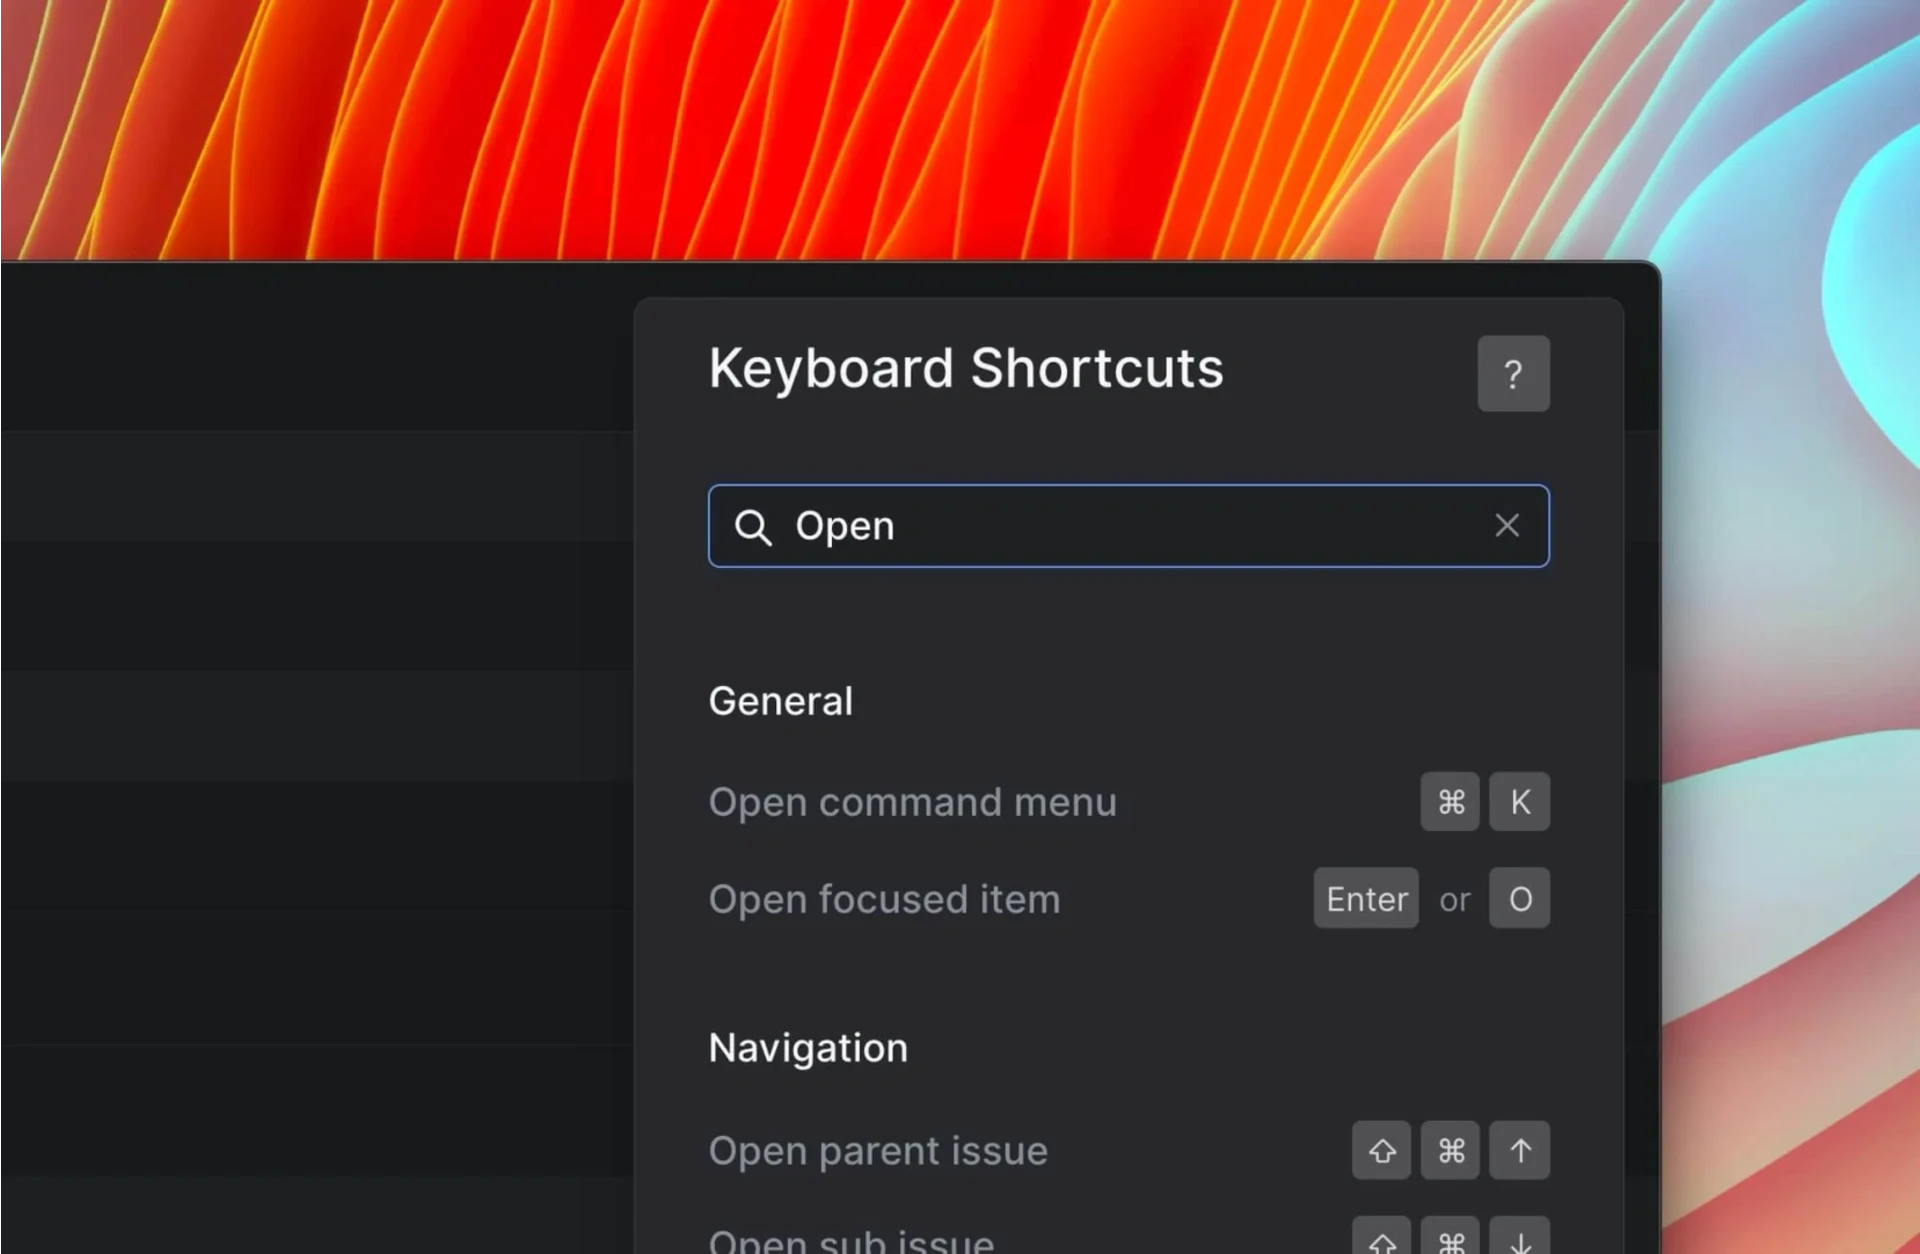 Linear Keyboard Shortcuts for quick software team product planning.